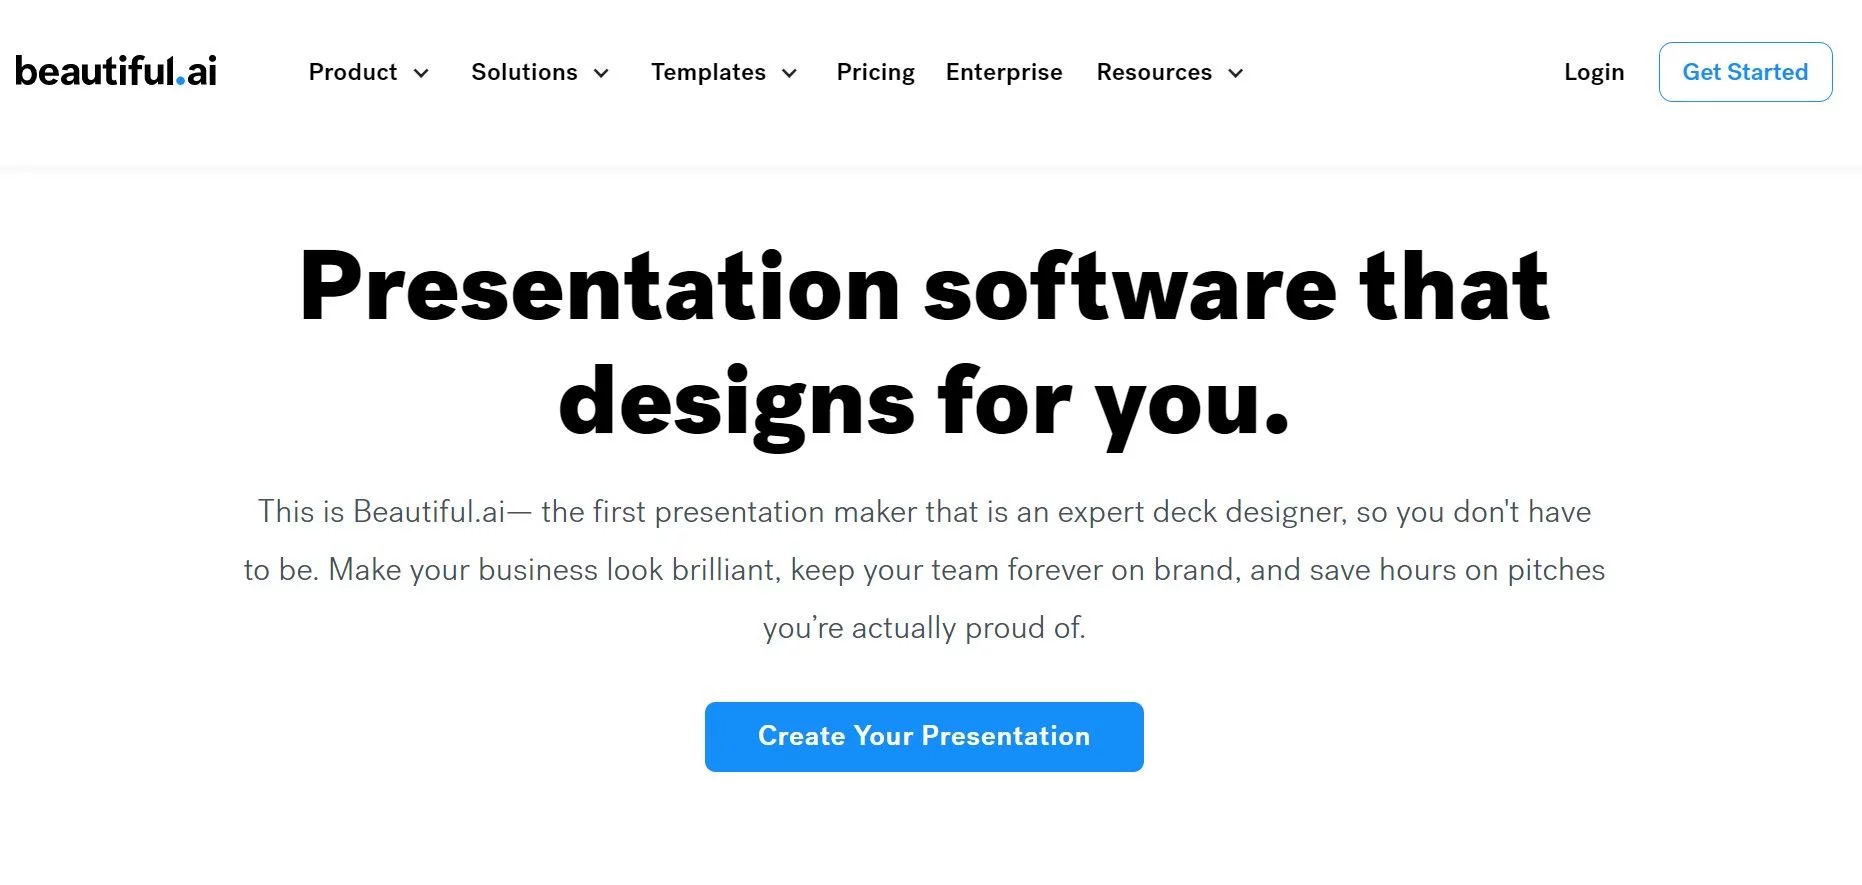  Presentation software that designs for you.